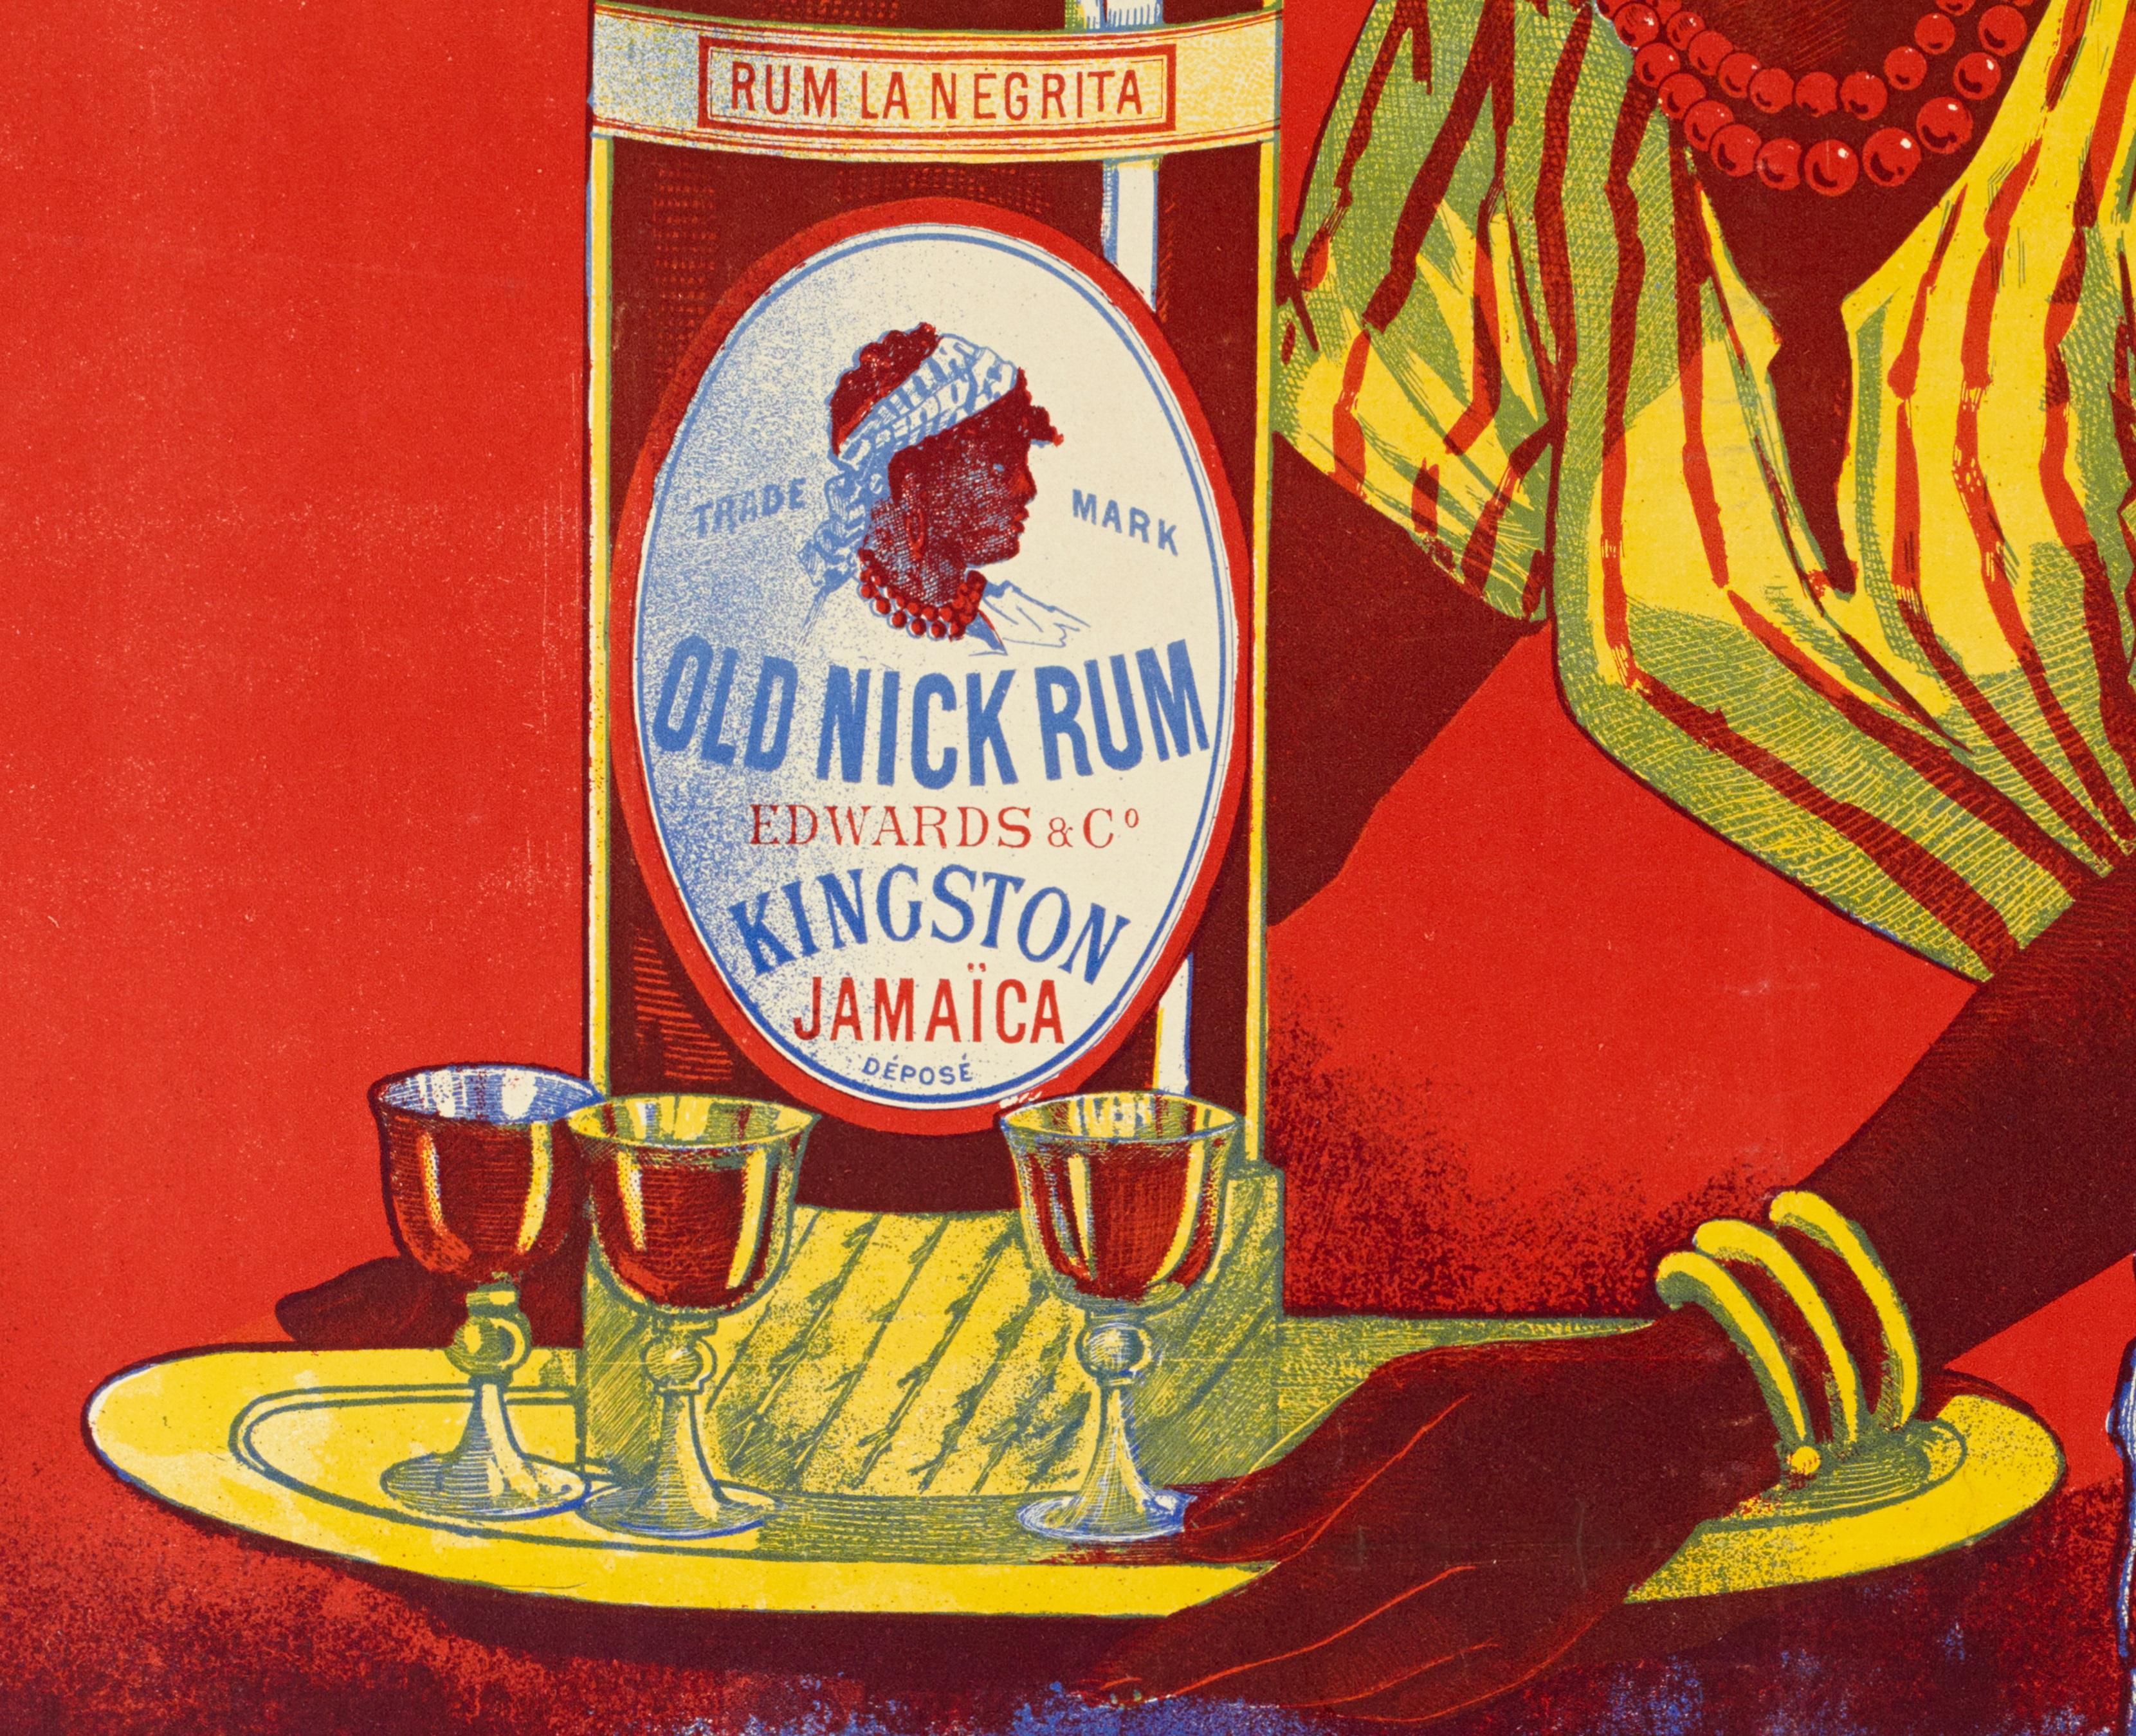 Original vintage poster-Rhum Negrita Old Nick-West Indies-Sugar Cane, 1899

We see a West Indie woman in a striped outfit. She holds a tray in her hands on that is placed a bottle of rum and three full glasses. The background is composed of three